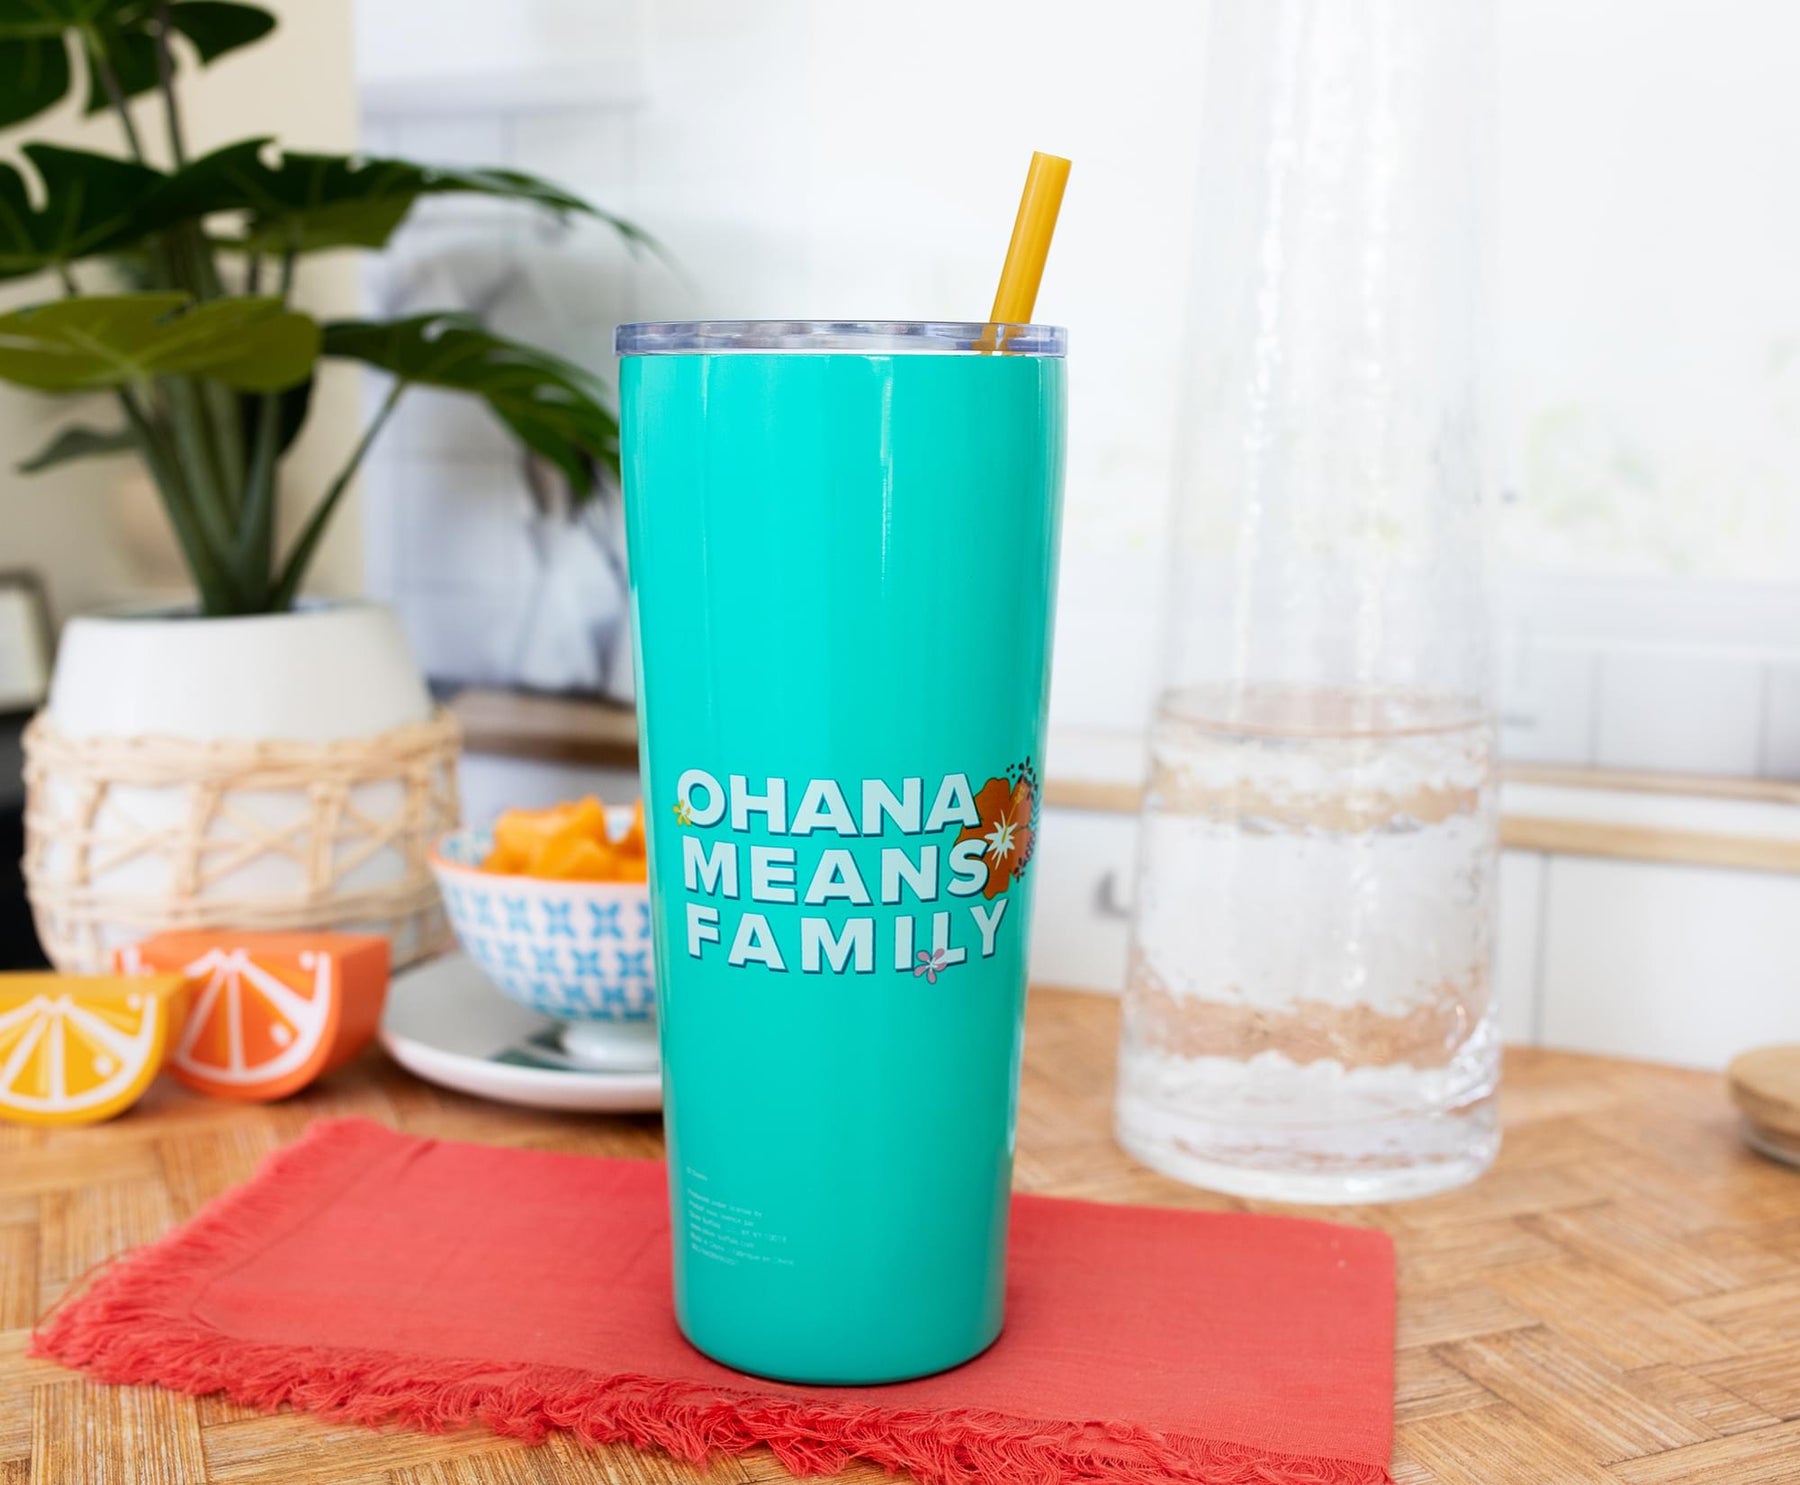 Disney Stitch Ohana Plastic Tumbler with Lid and Straw 32 oz Cup – Lonestar  Finds